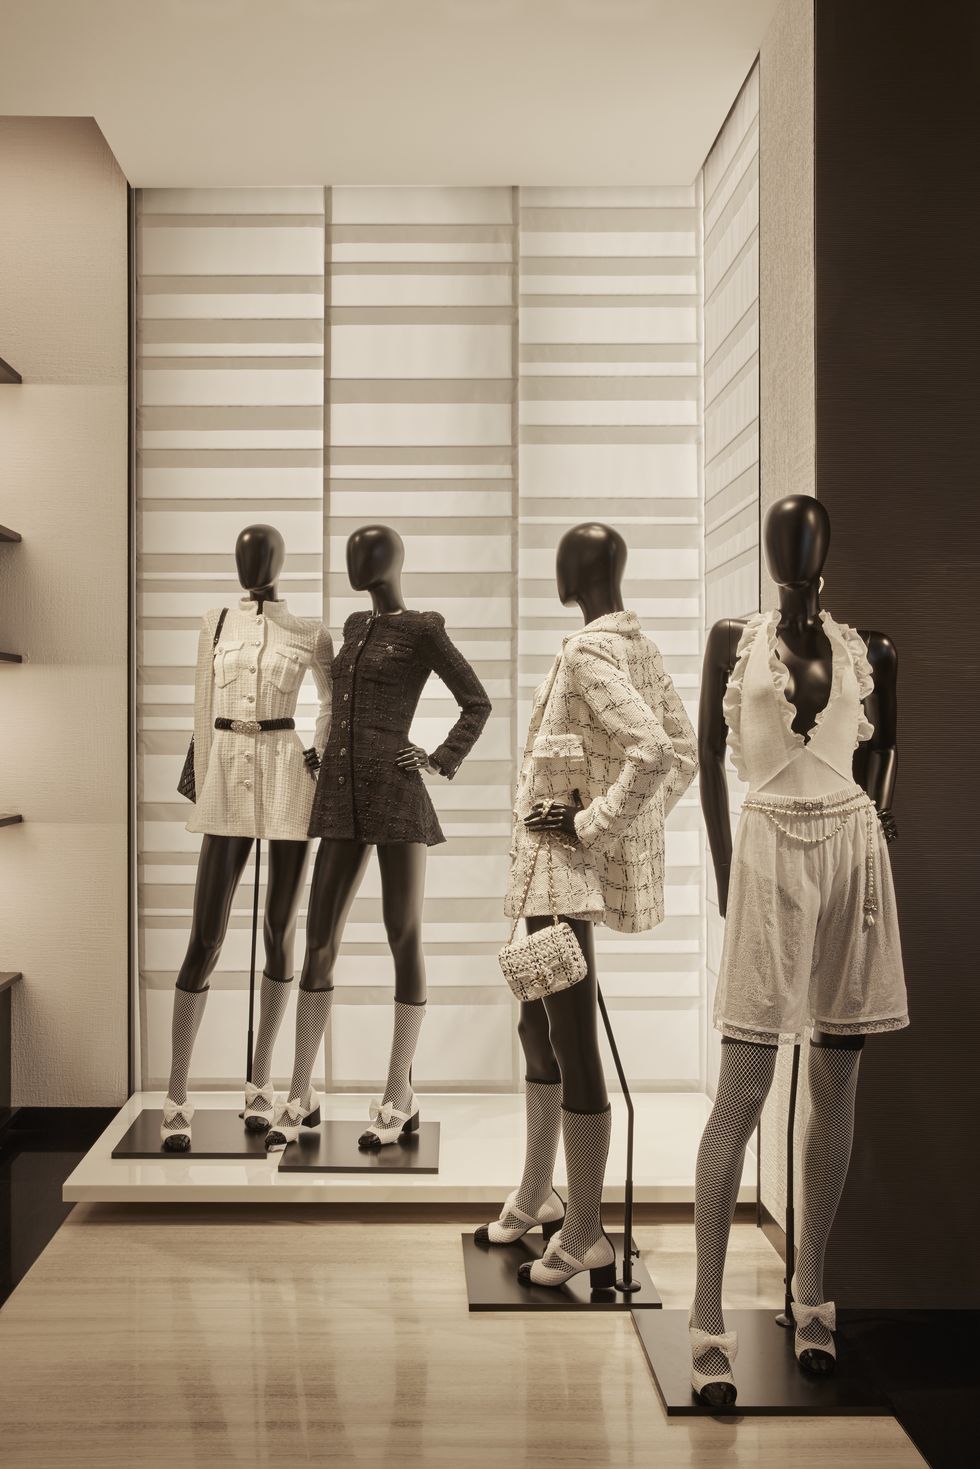 Chanel: Inside The New Beverly Hills Flagship Store